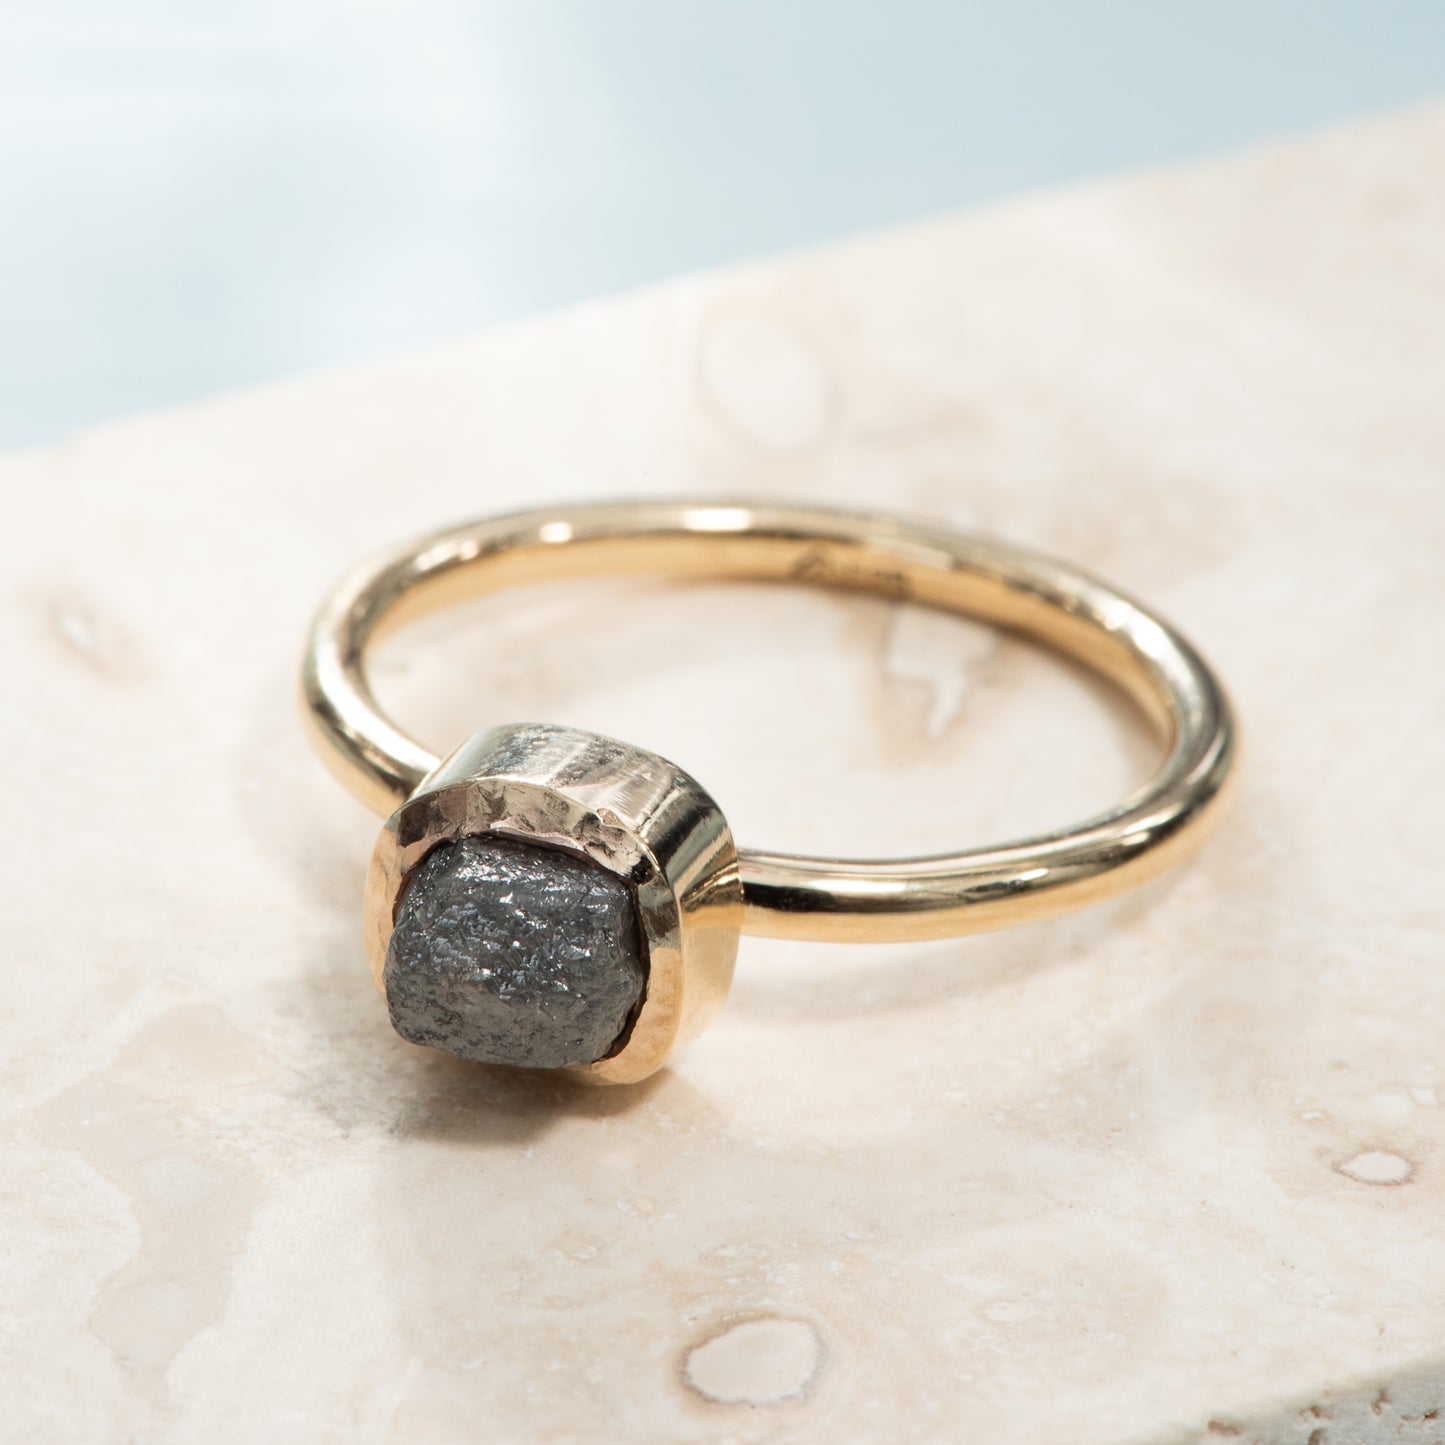 A rounded square bezel setting holding a grey rough diamond on a polished yellow gold band.